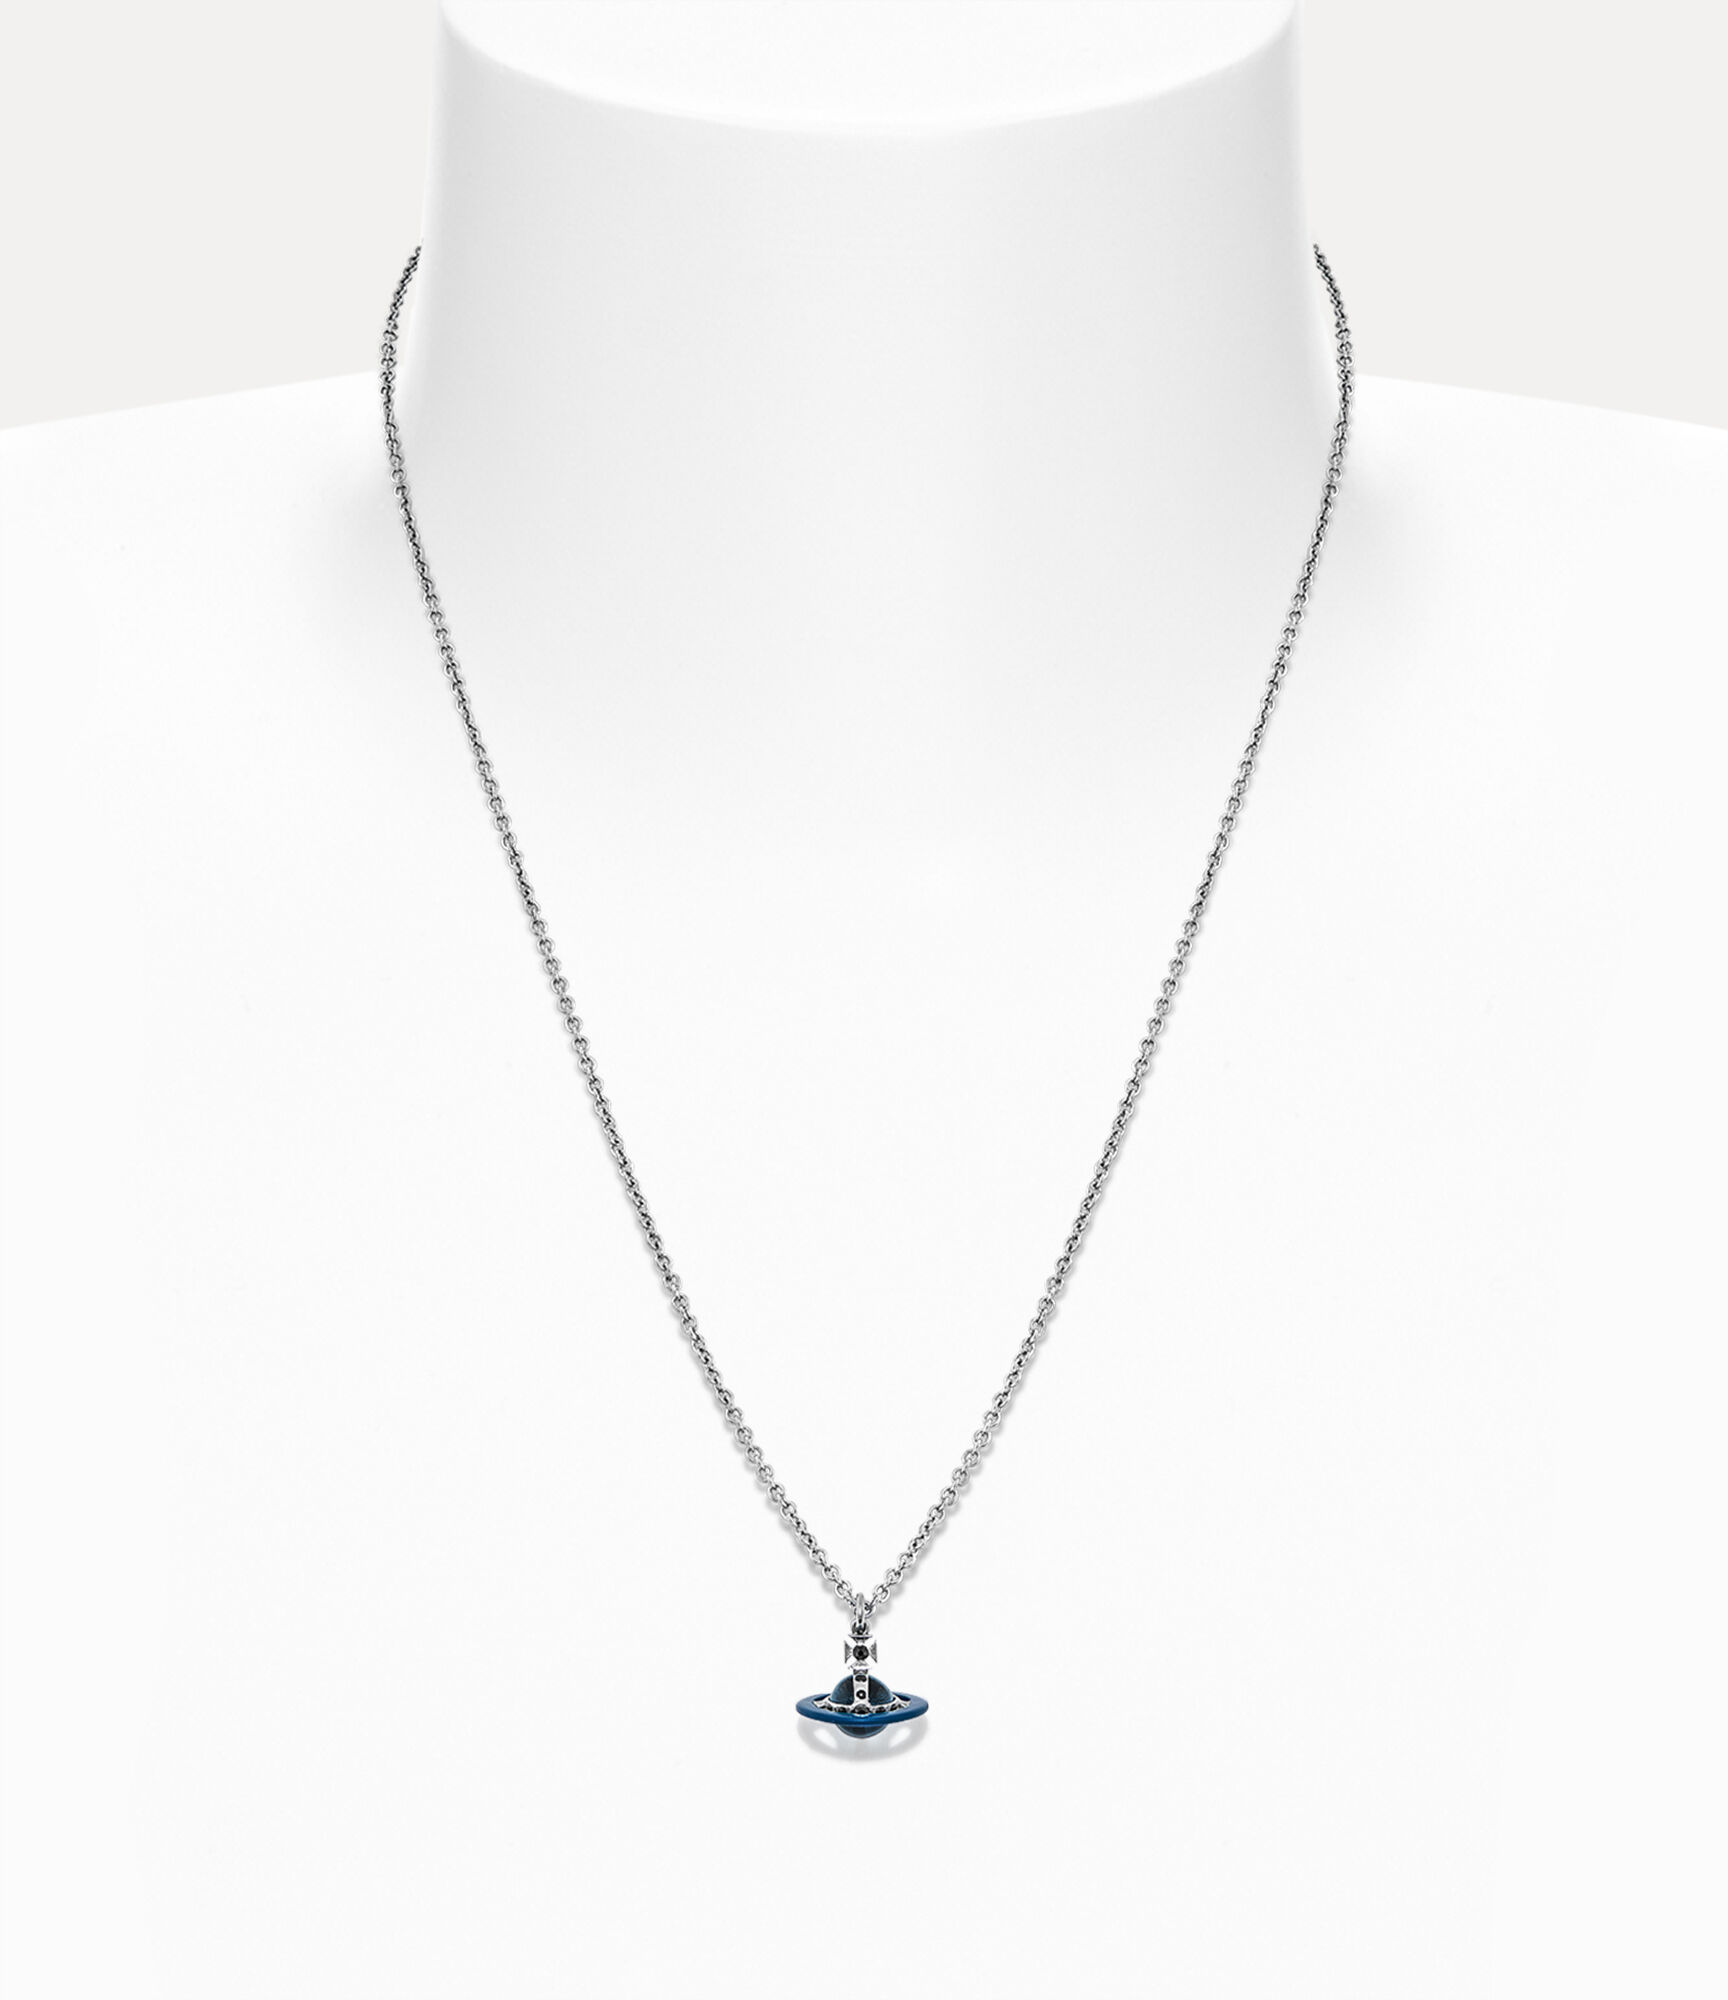 Vivienne Westwood New Tiny Orb Pendant Necklace In Silver | ModeSens